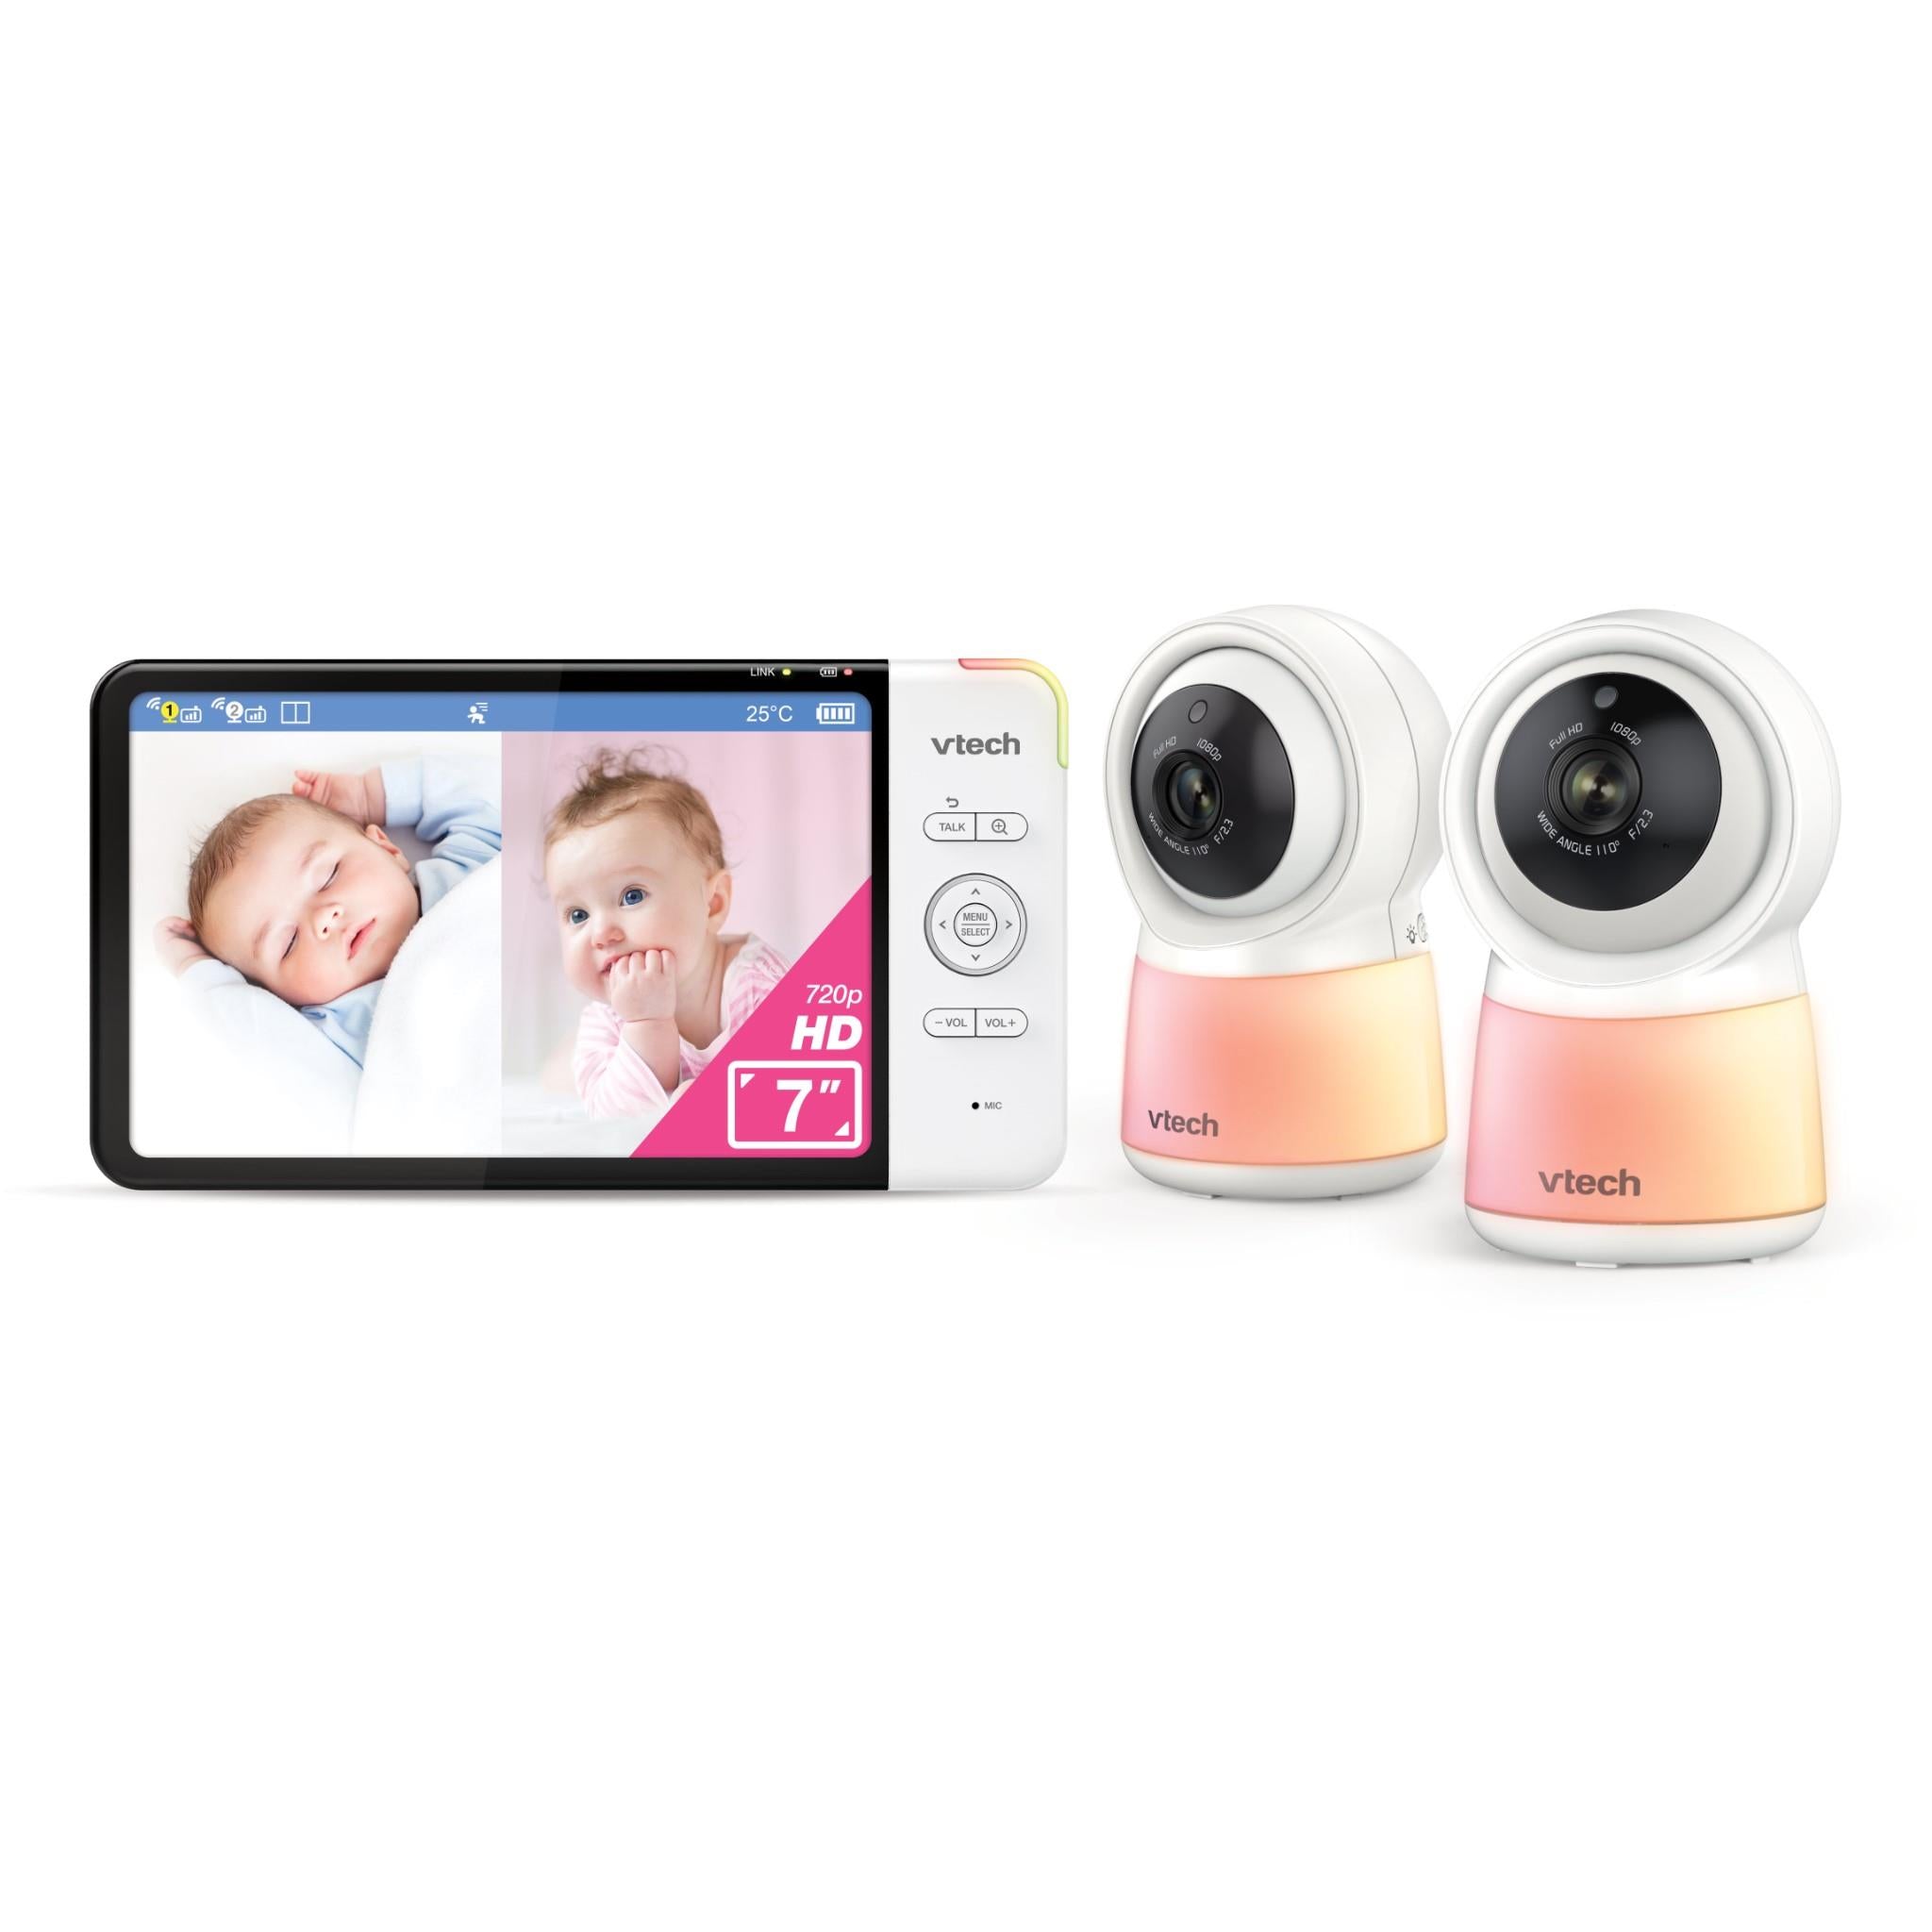 vtech rm7754hdv2 7” 2-camera smart hd video monitor with remote access